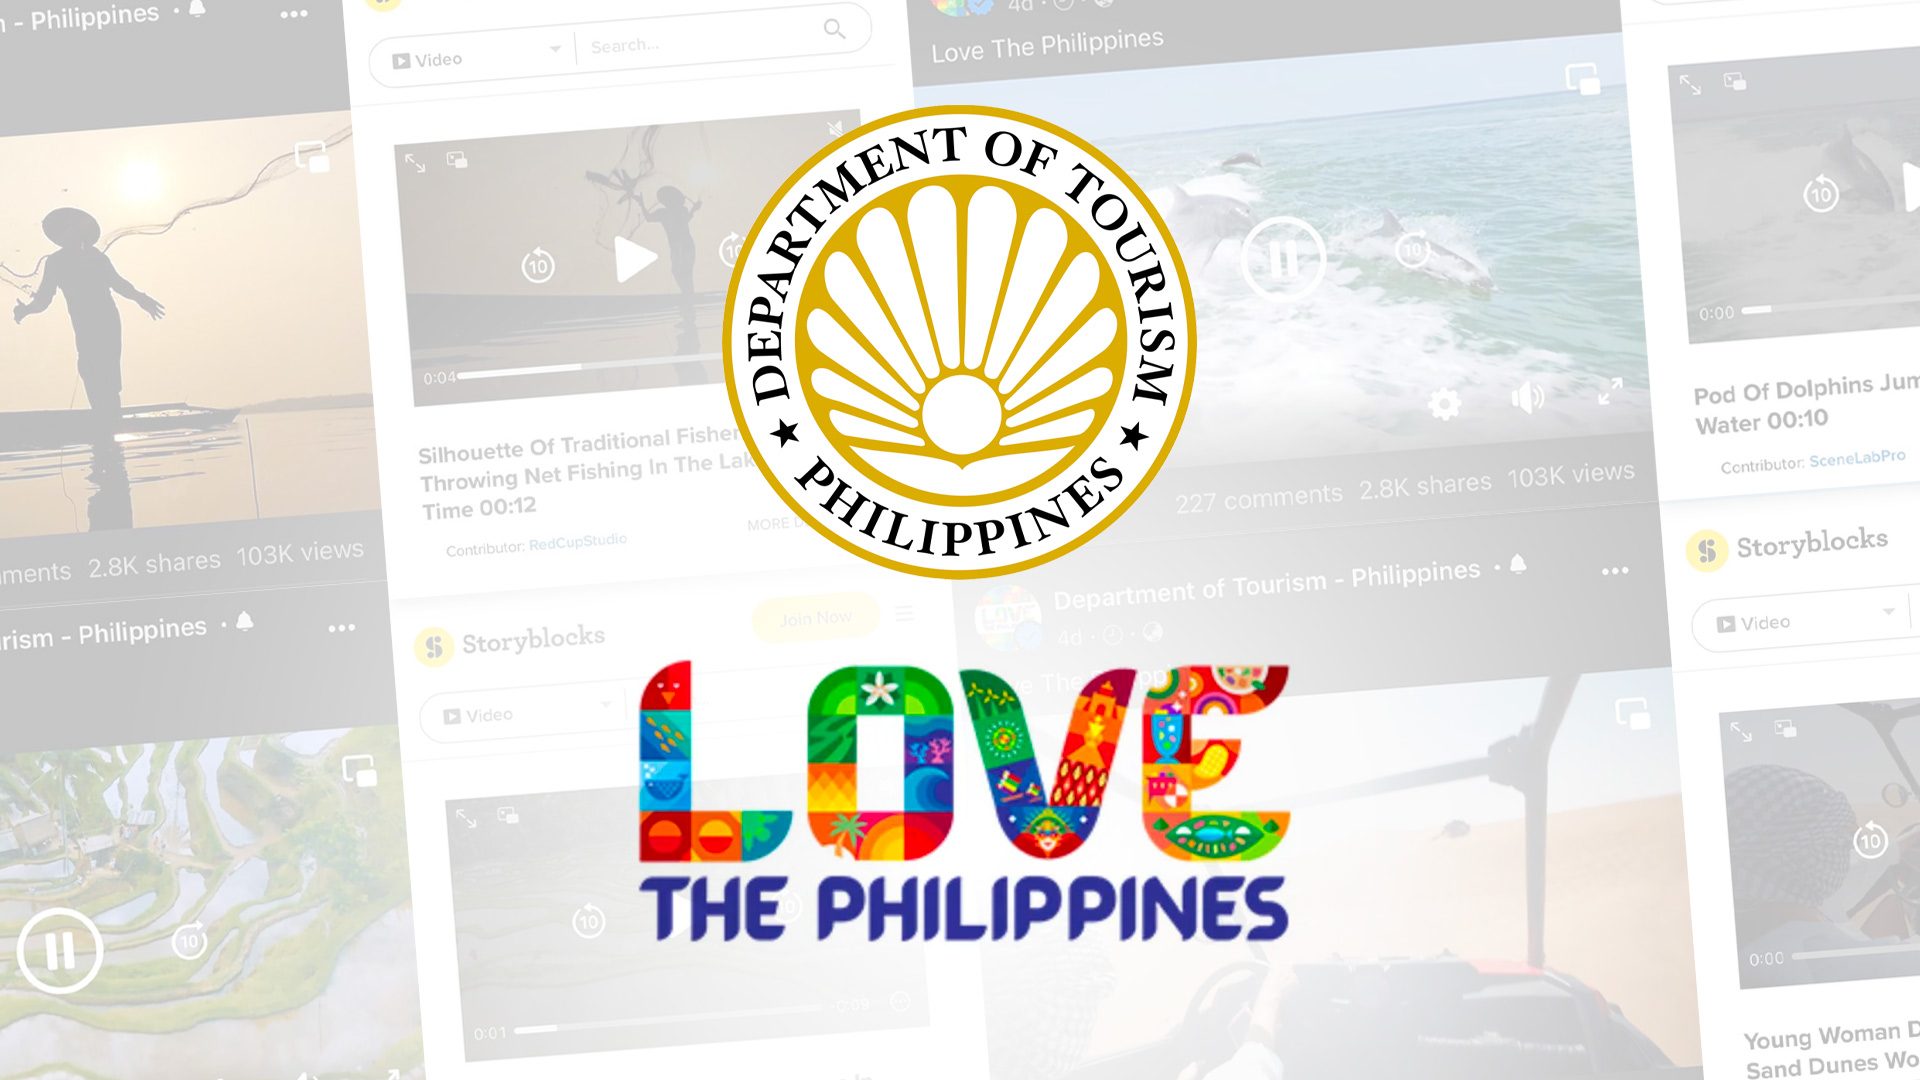 DOT moves to cut ties with DDB Philippines after tourism rebrand mess